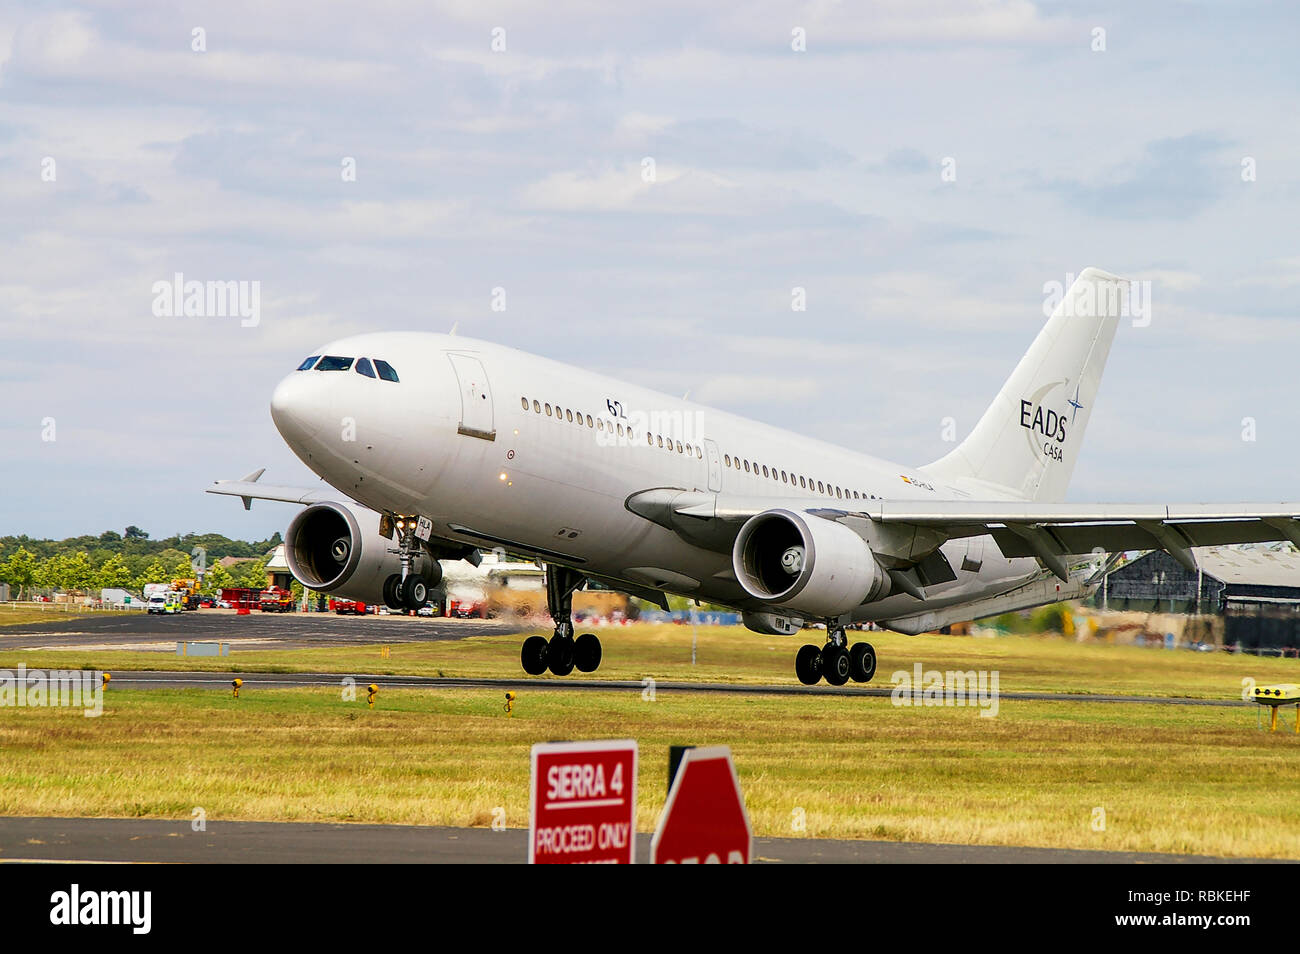 EADS CASA Airbus A310 -324 MRTT Multi Role Tanker Transport jet plane at Farnborough International Airshow. Dual role air refuelling tanker and cargo Stock Photo